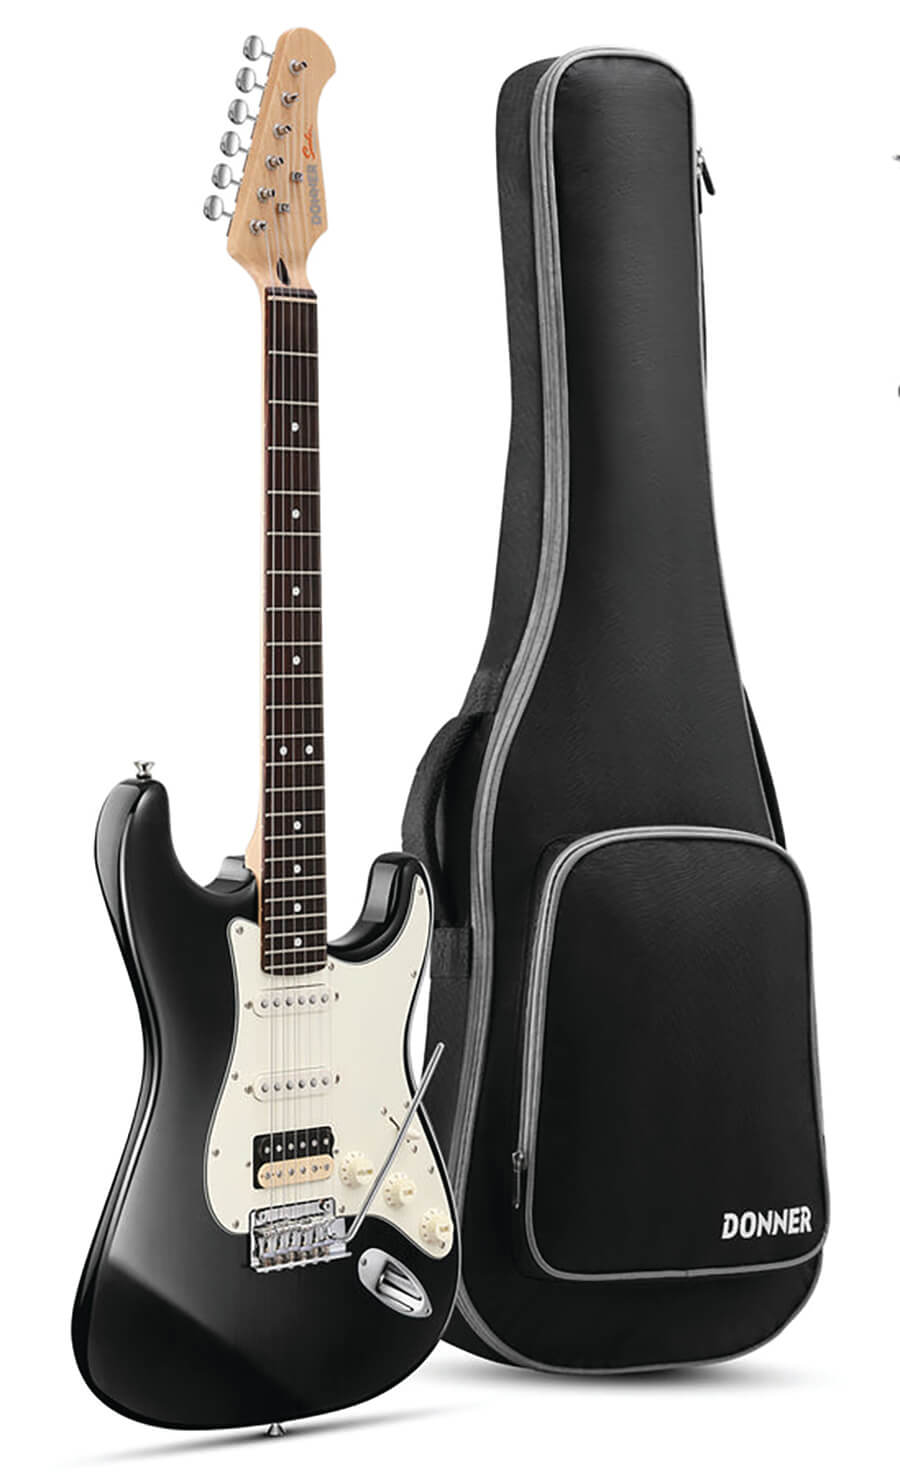 Donner DST-400 Electric Guitar Review | Performer Mag